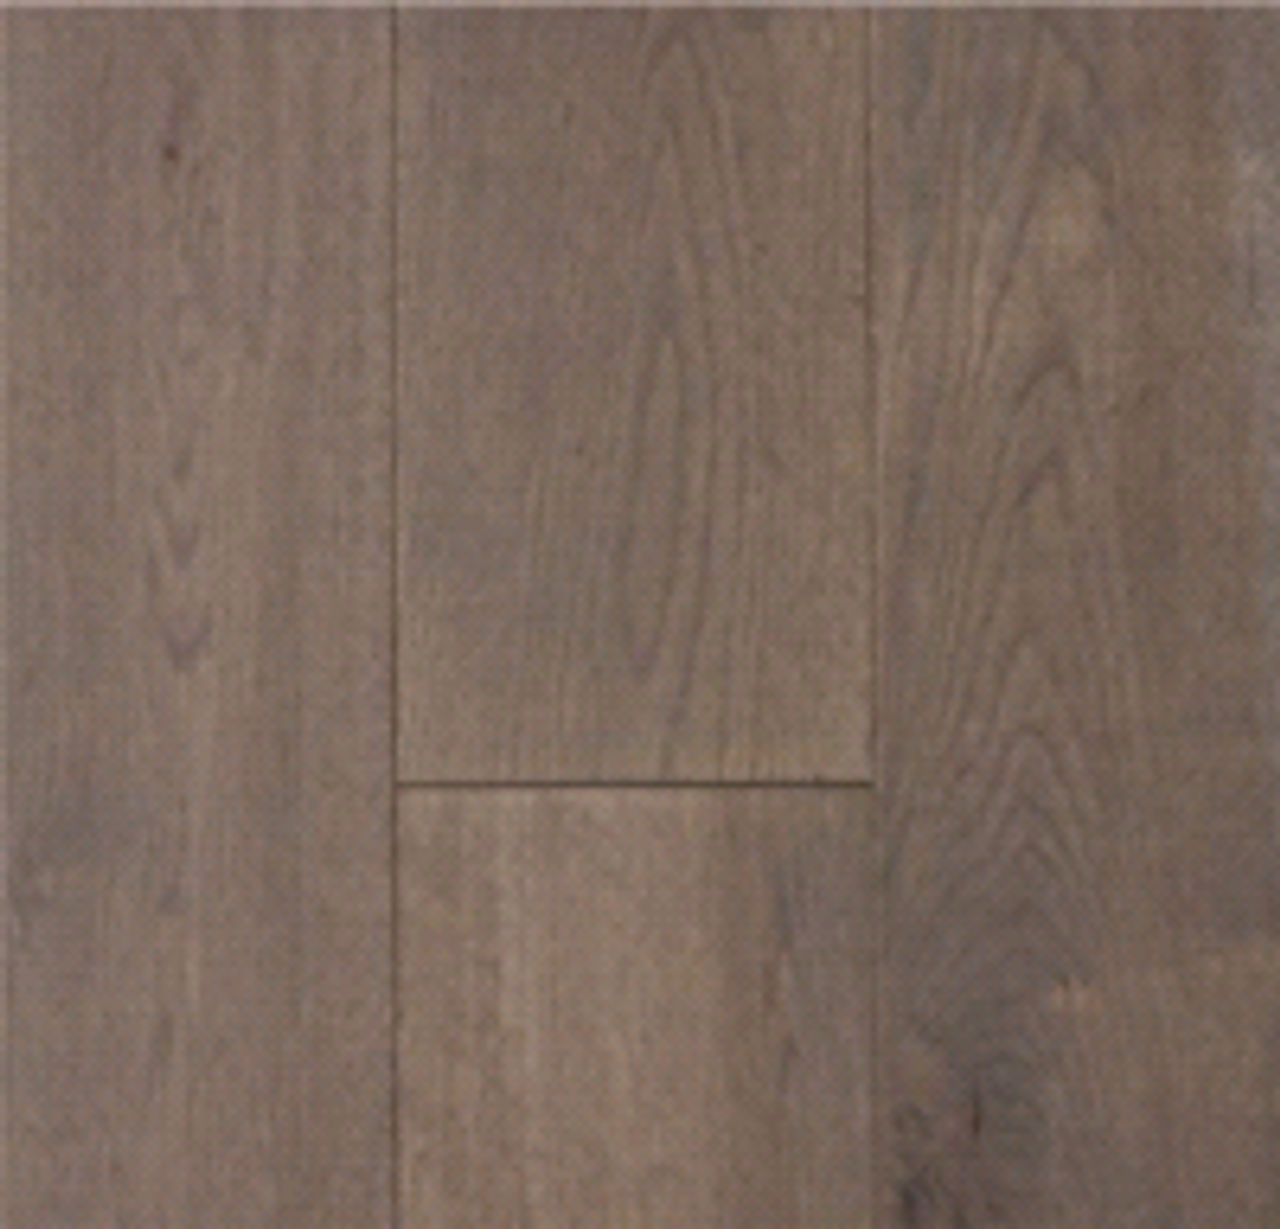 MF WHITE OAK CHARCOAL VALUE COLLECTION EURO SAWN 7'' X 1/2'' - 31 SF/CTN - CABIN GRADE ENGINEERED HARDWOOD FLOORING SOLD AS IS NO REFUND NO RETURN